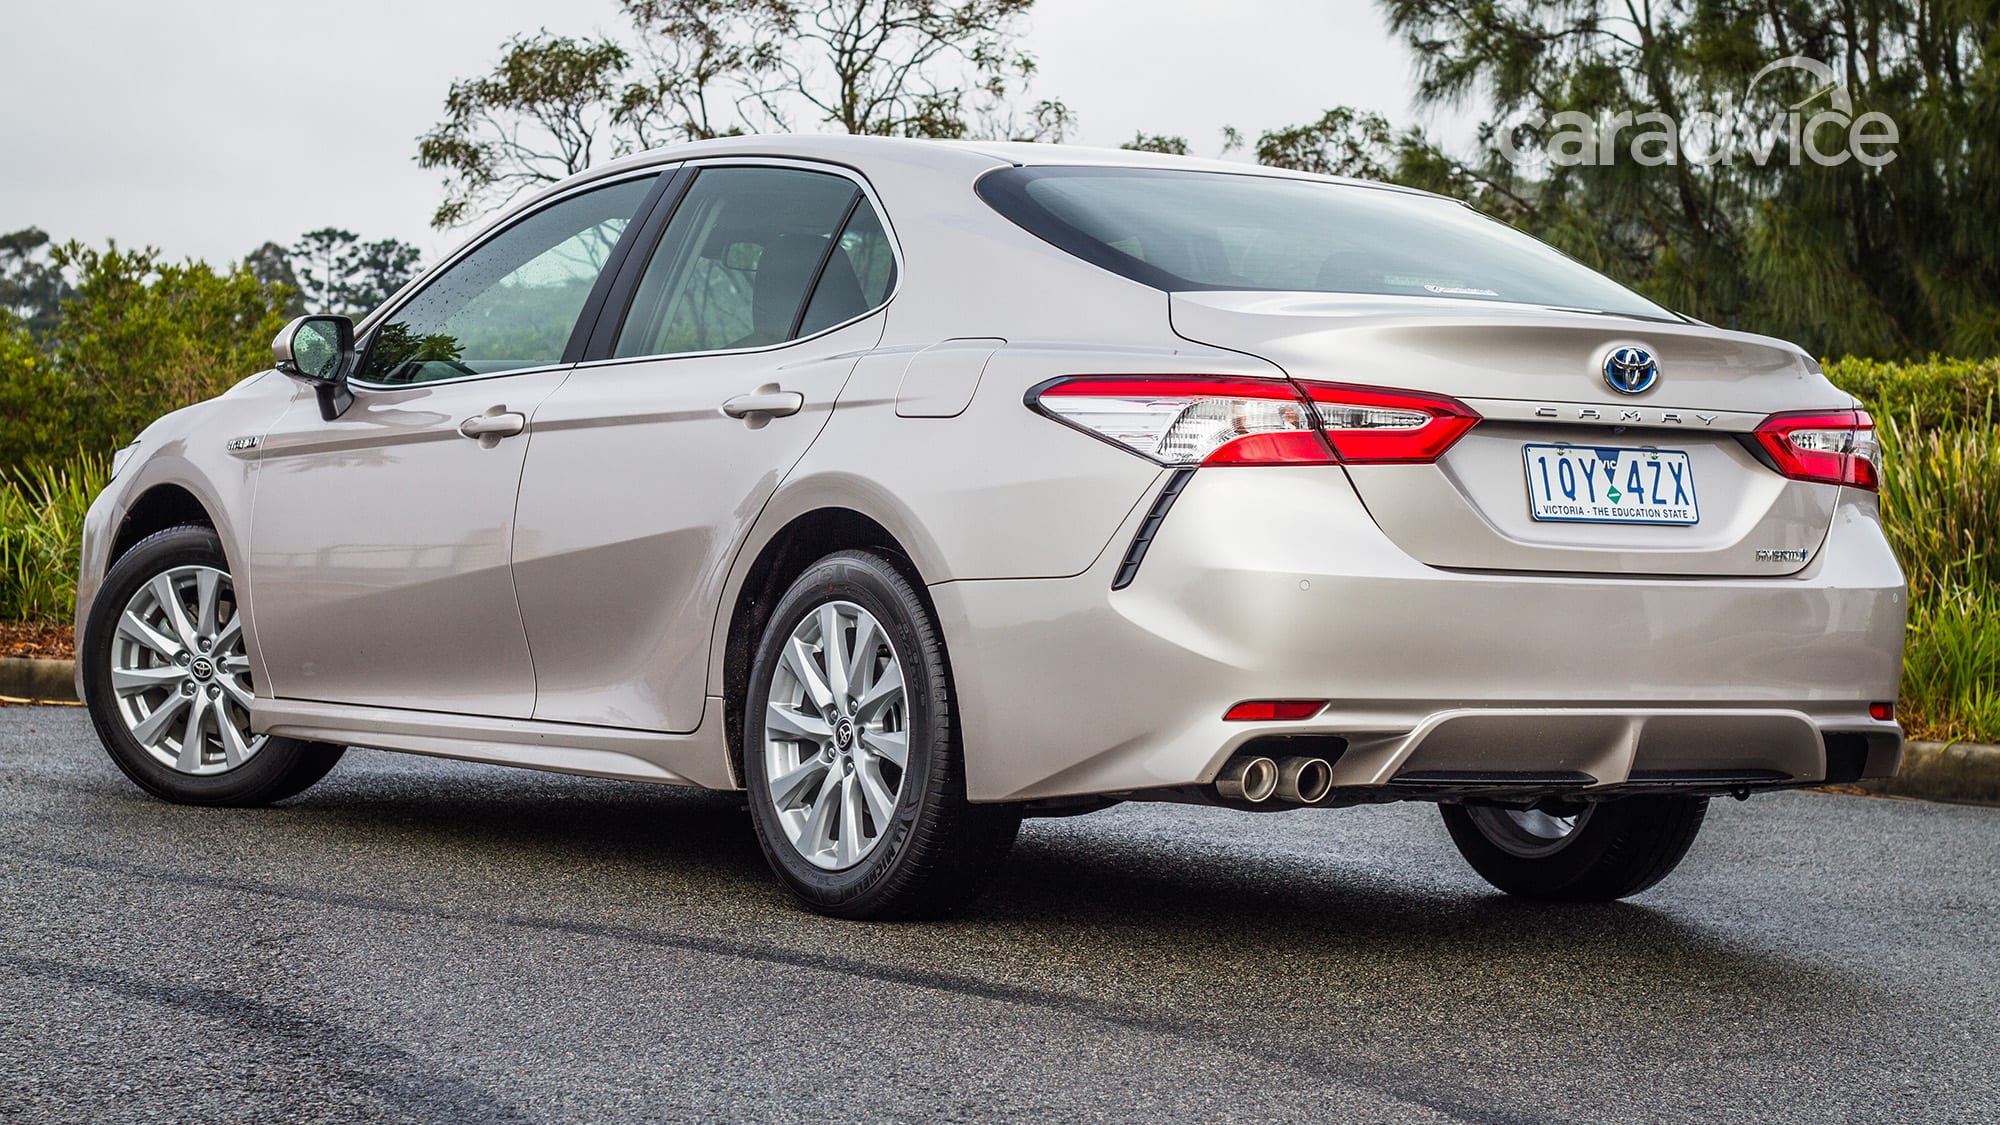 2020 Toyota Camry hybrid review: Ascent Sport | CarAdvice